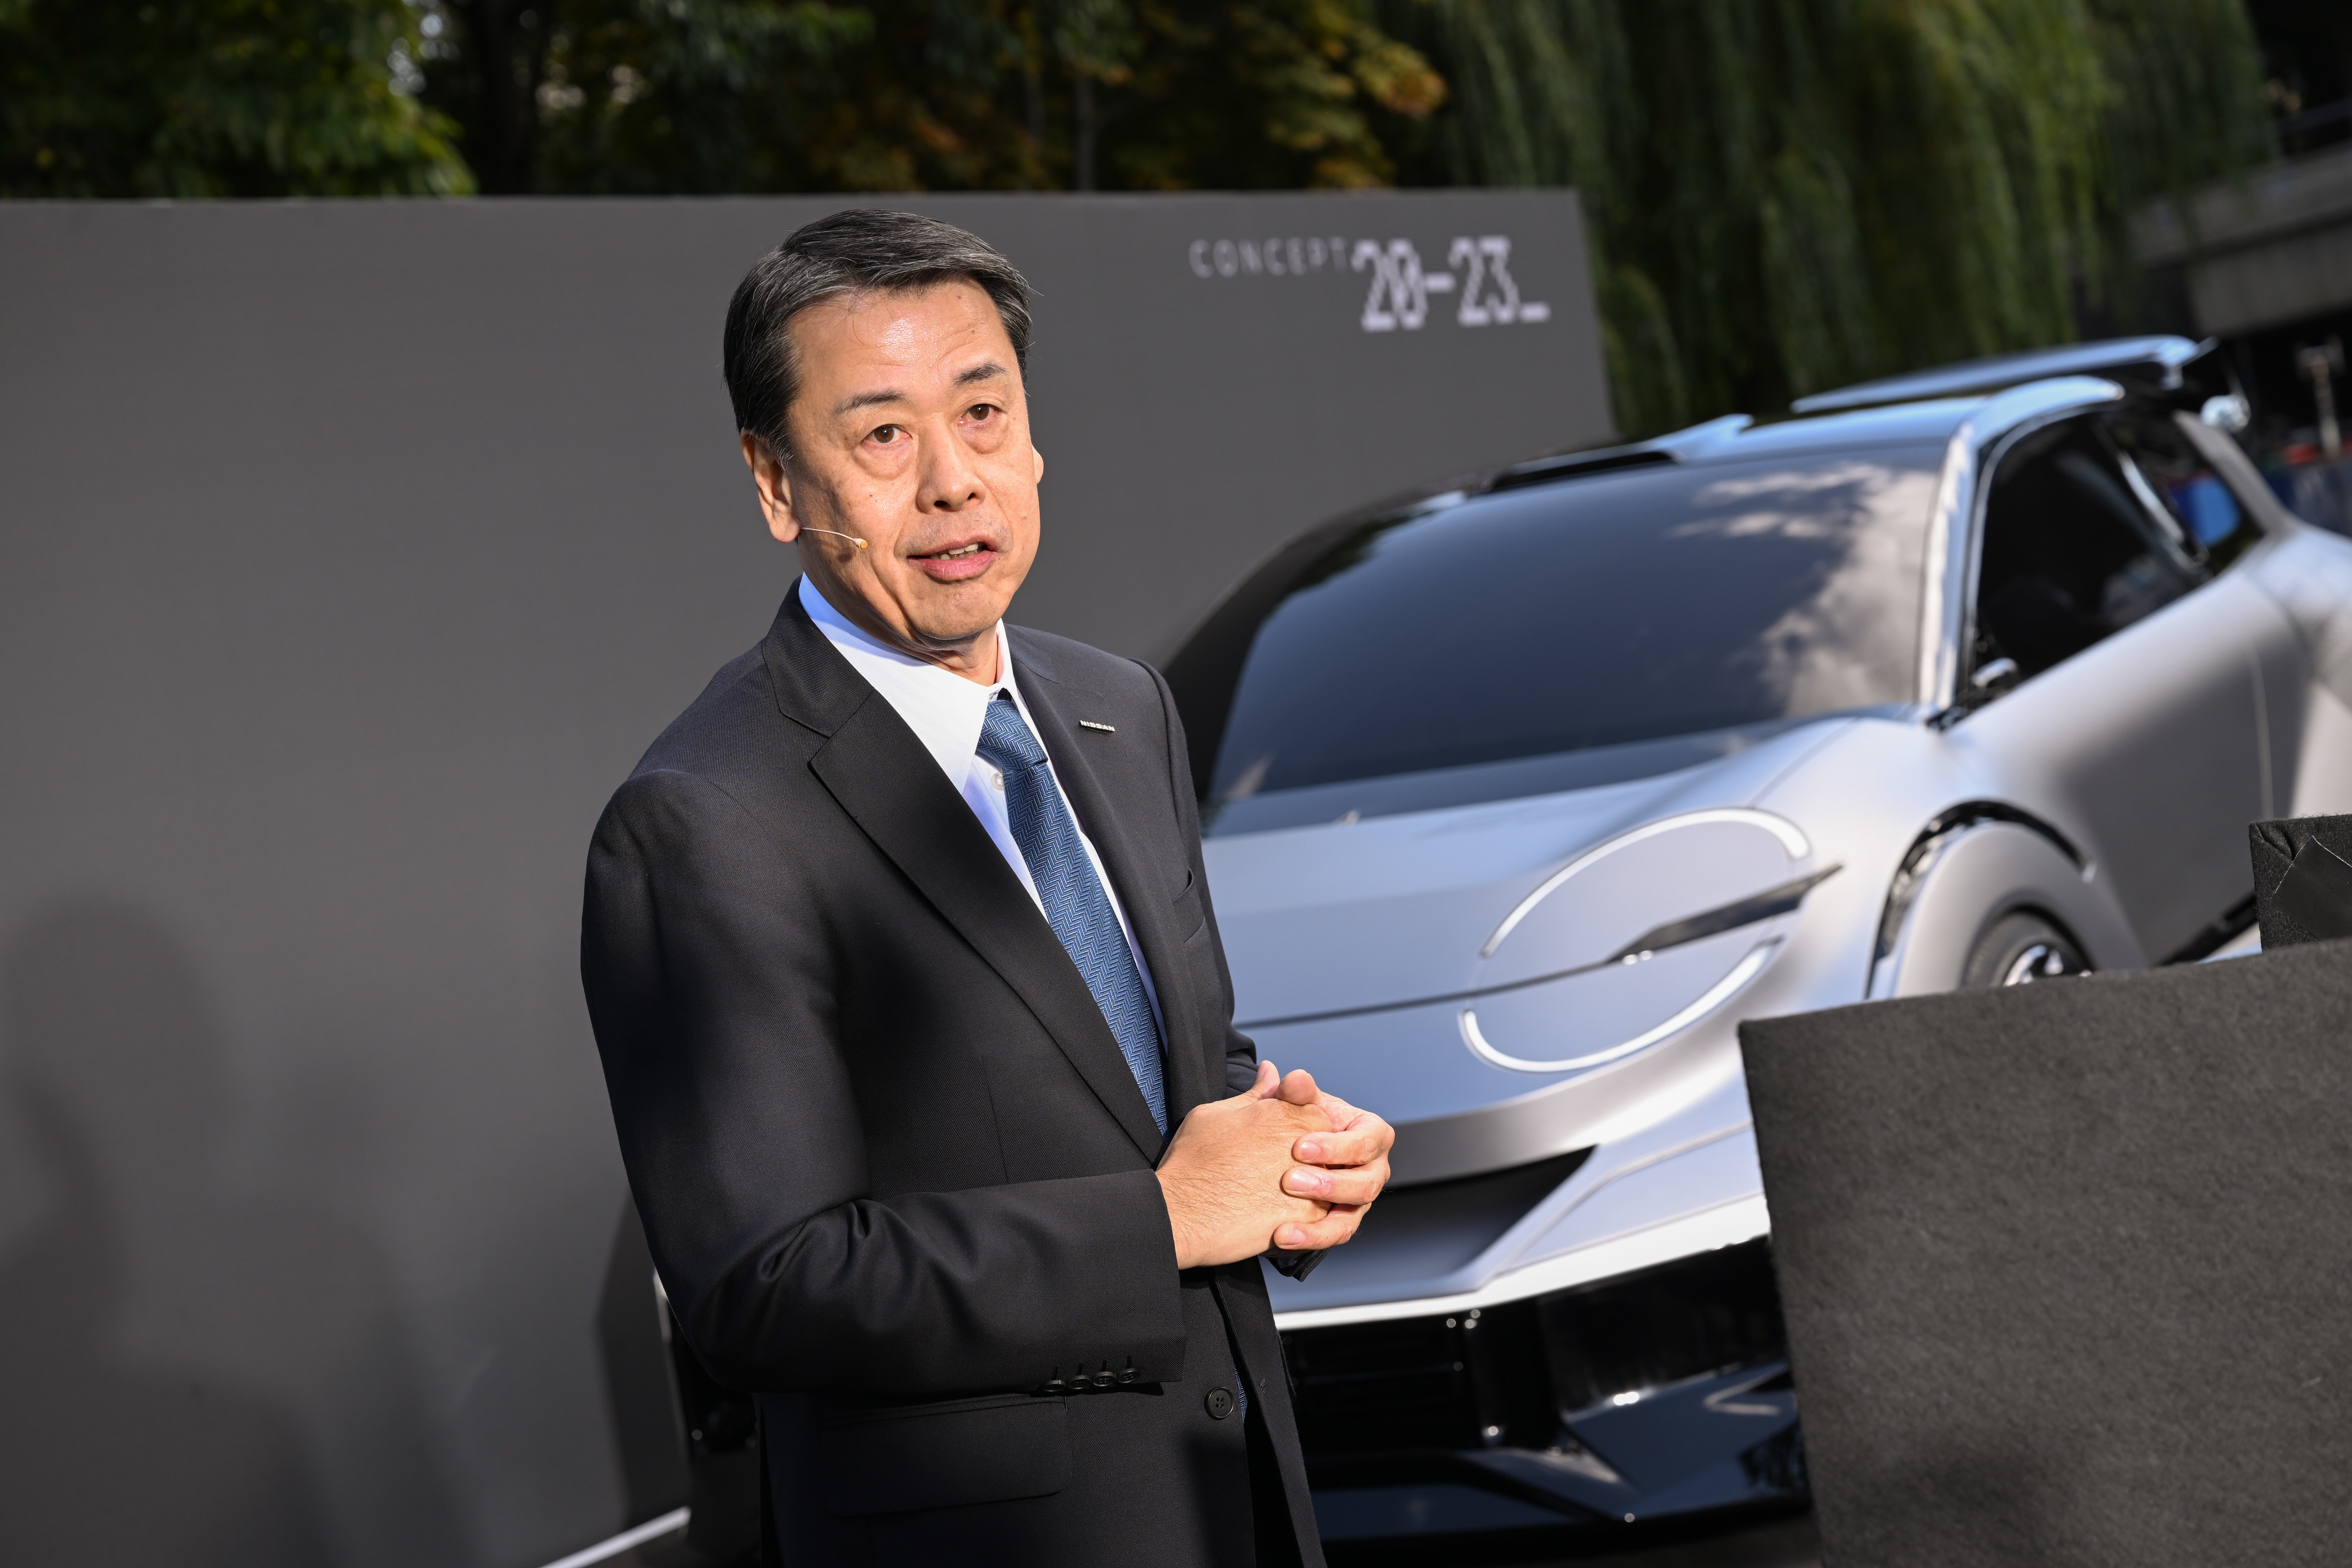 Makoto Uchida said Nissan would go all-electric in Europe by 2030 as he unveiled the company’s latest electric vehicle concept